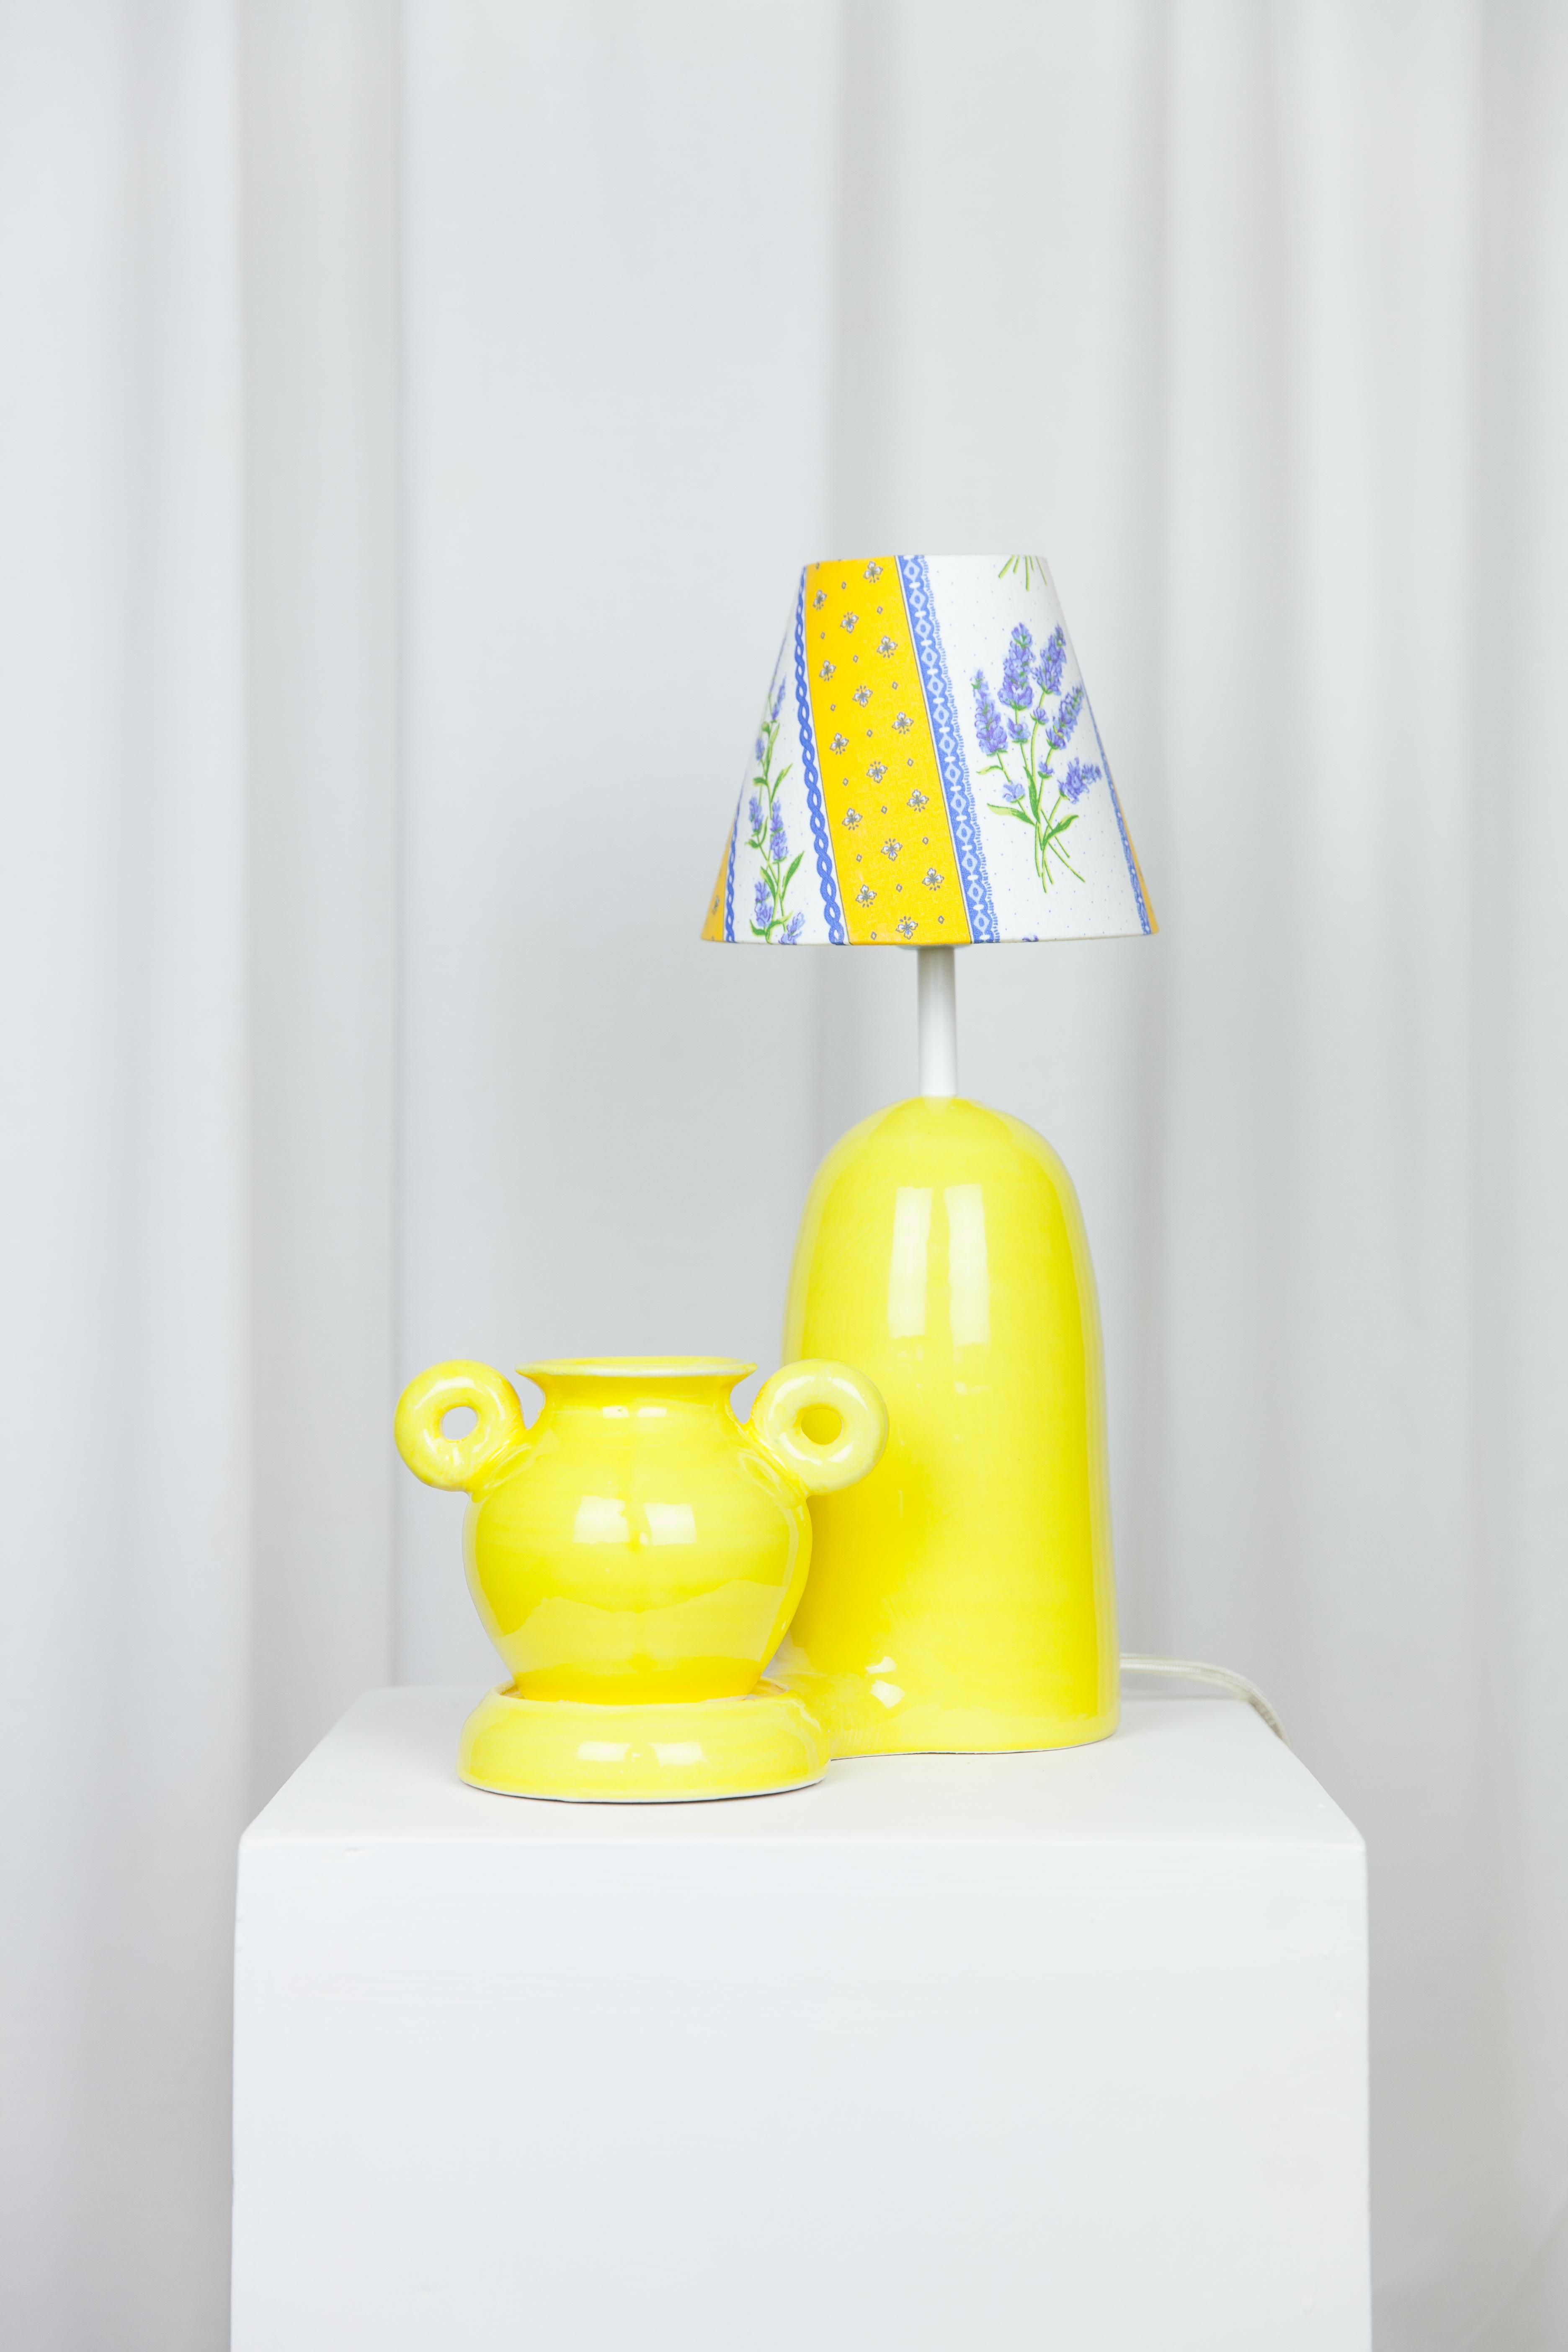 Bloom Terracotta lamp + vase by Lola Mayeras
Dimensions: D25 x W17 x W40 cm
Materials: Earthenware.

Lamp with detachable vase, white earthenware, glazed in yellow.
This piece is designed and handcrafted in the south of France.

All our lamps